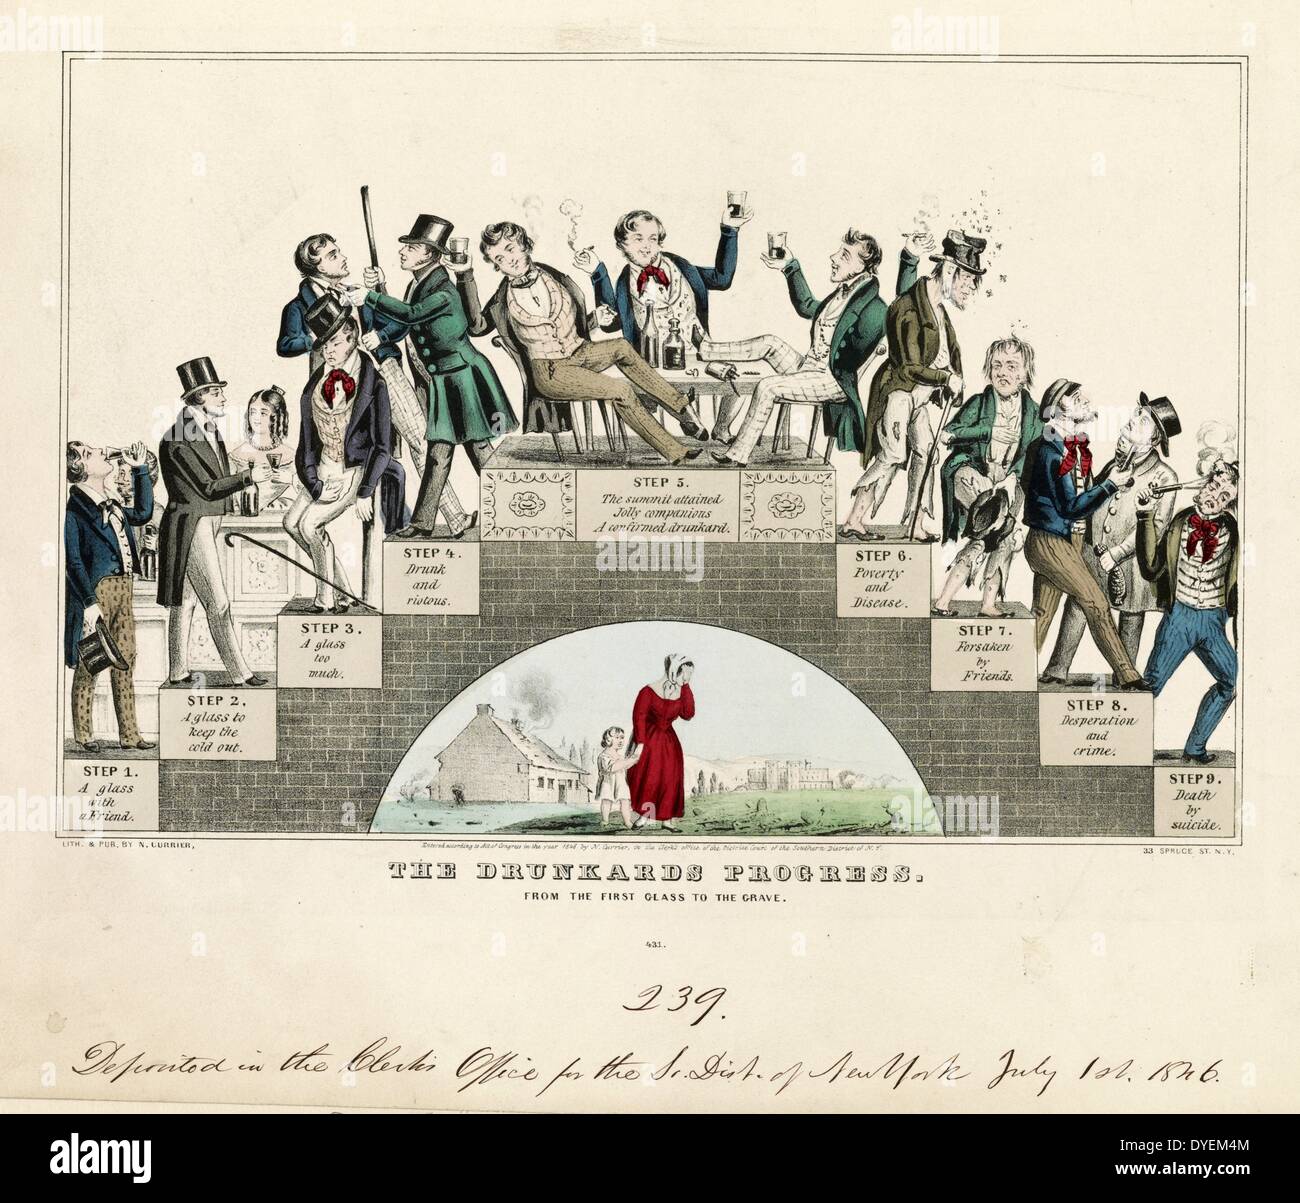 The drunkards progress. From the first glass to the grave. Lithograph by N. Currier. Published 1846. Print shows an archway of the nine steps of a drunkard's progress, beginning with a man in fancy dress having 'a glass with a friend' and then his gradual decline in society with poverty & disease, criminal activity, becoming a bum, and his eventual 'death by suicide'; a weeping woman with child is under archway. Stock Photo